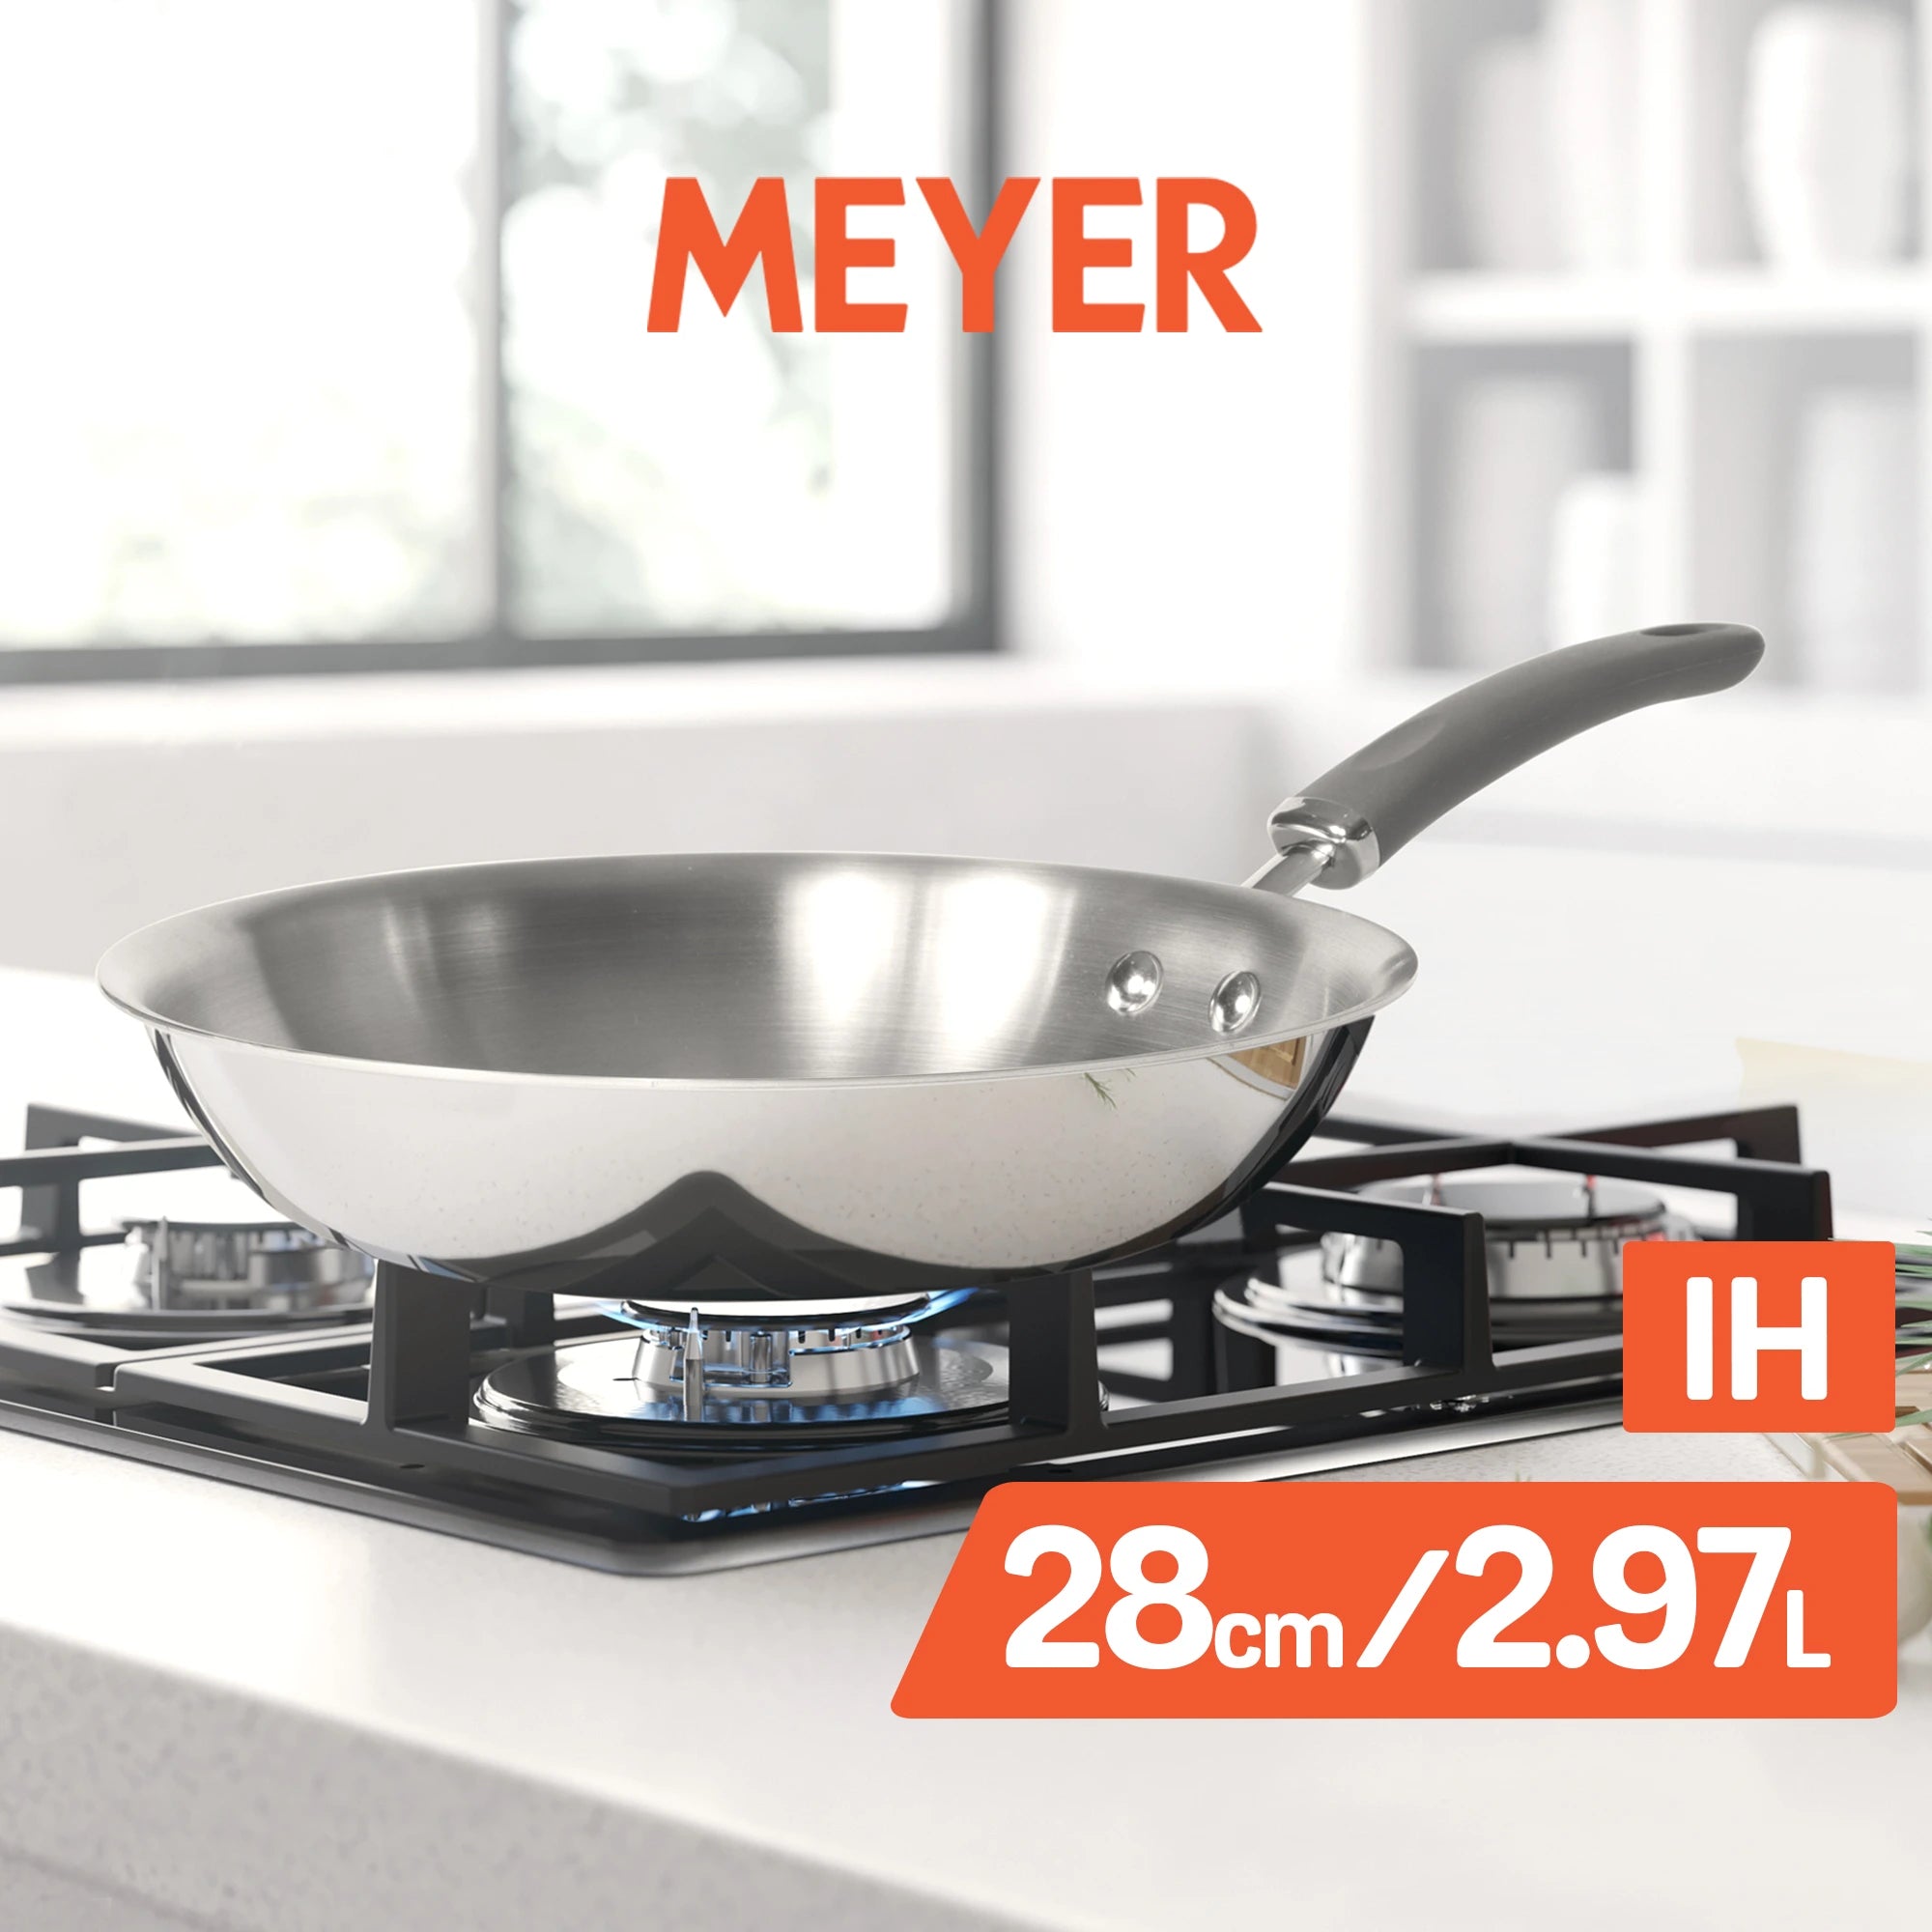 Meyer Trivantage Stainless Steel Triply Cookware Open Frypan, 28cm